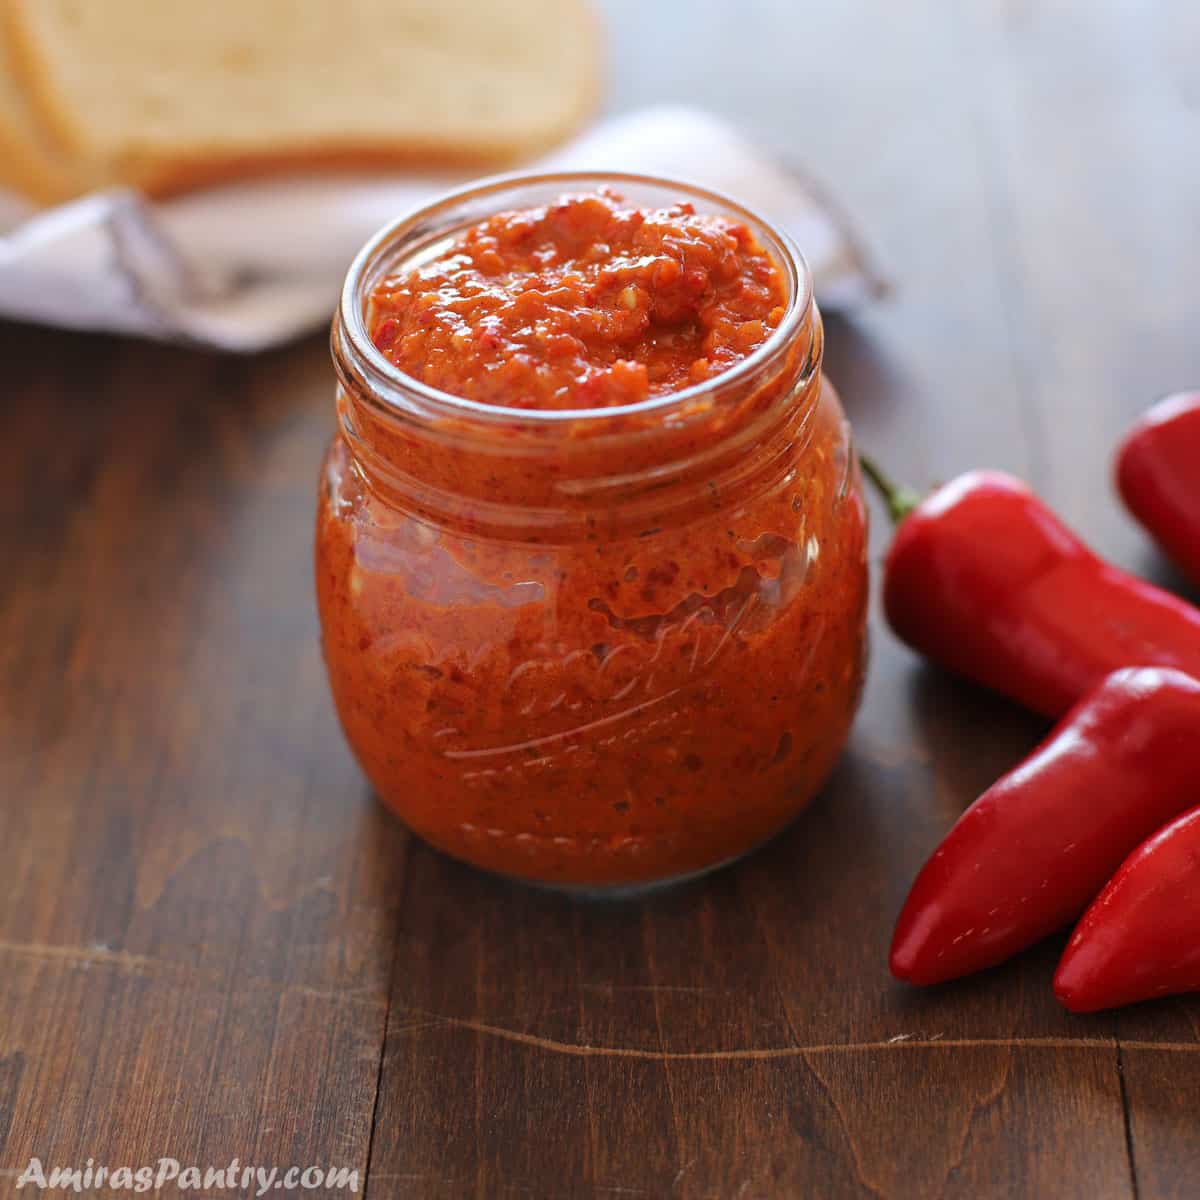 A jar of Harissa on a wooden surafce with some chili peppers on the side and bread on the back.